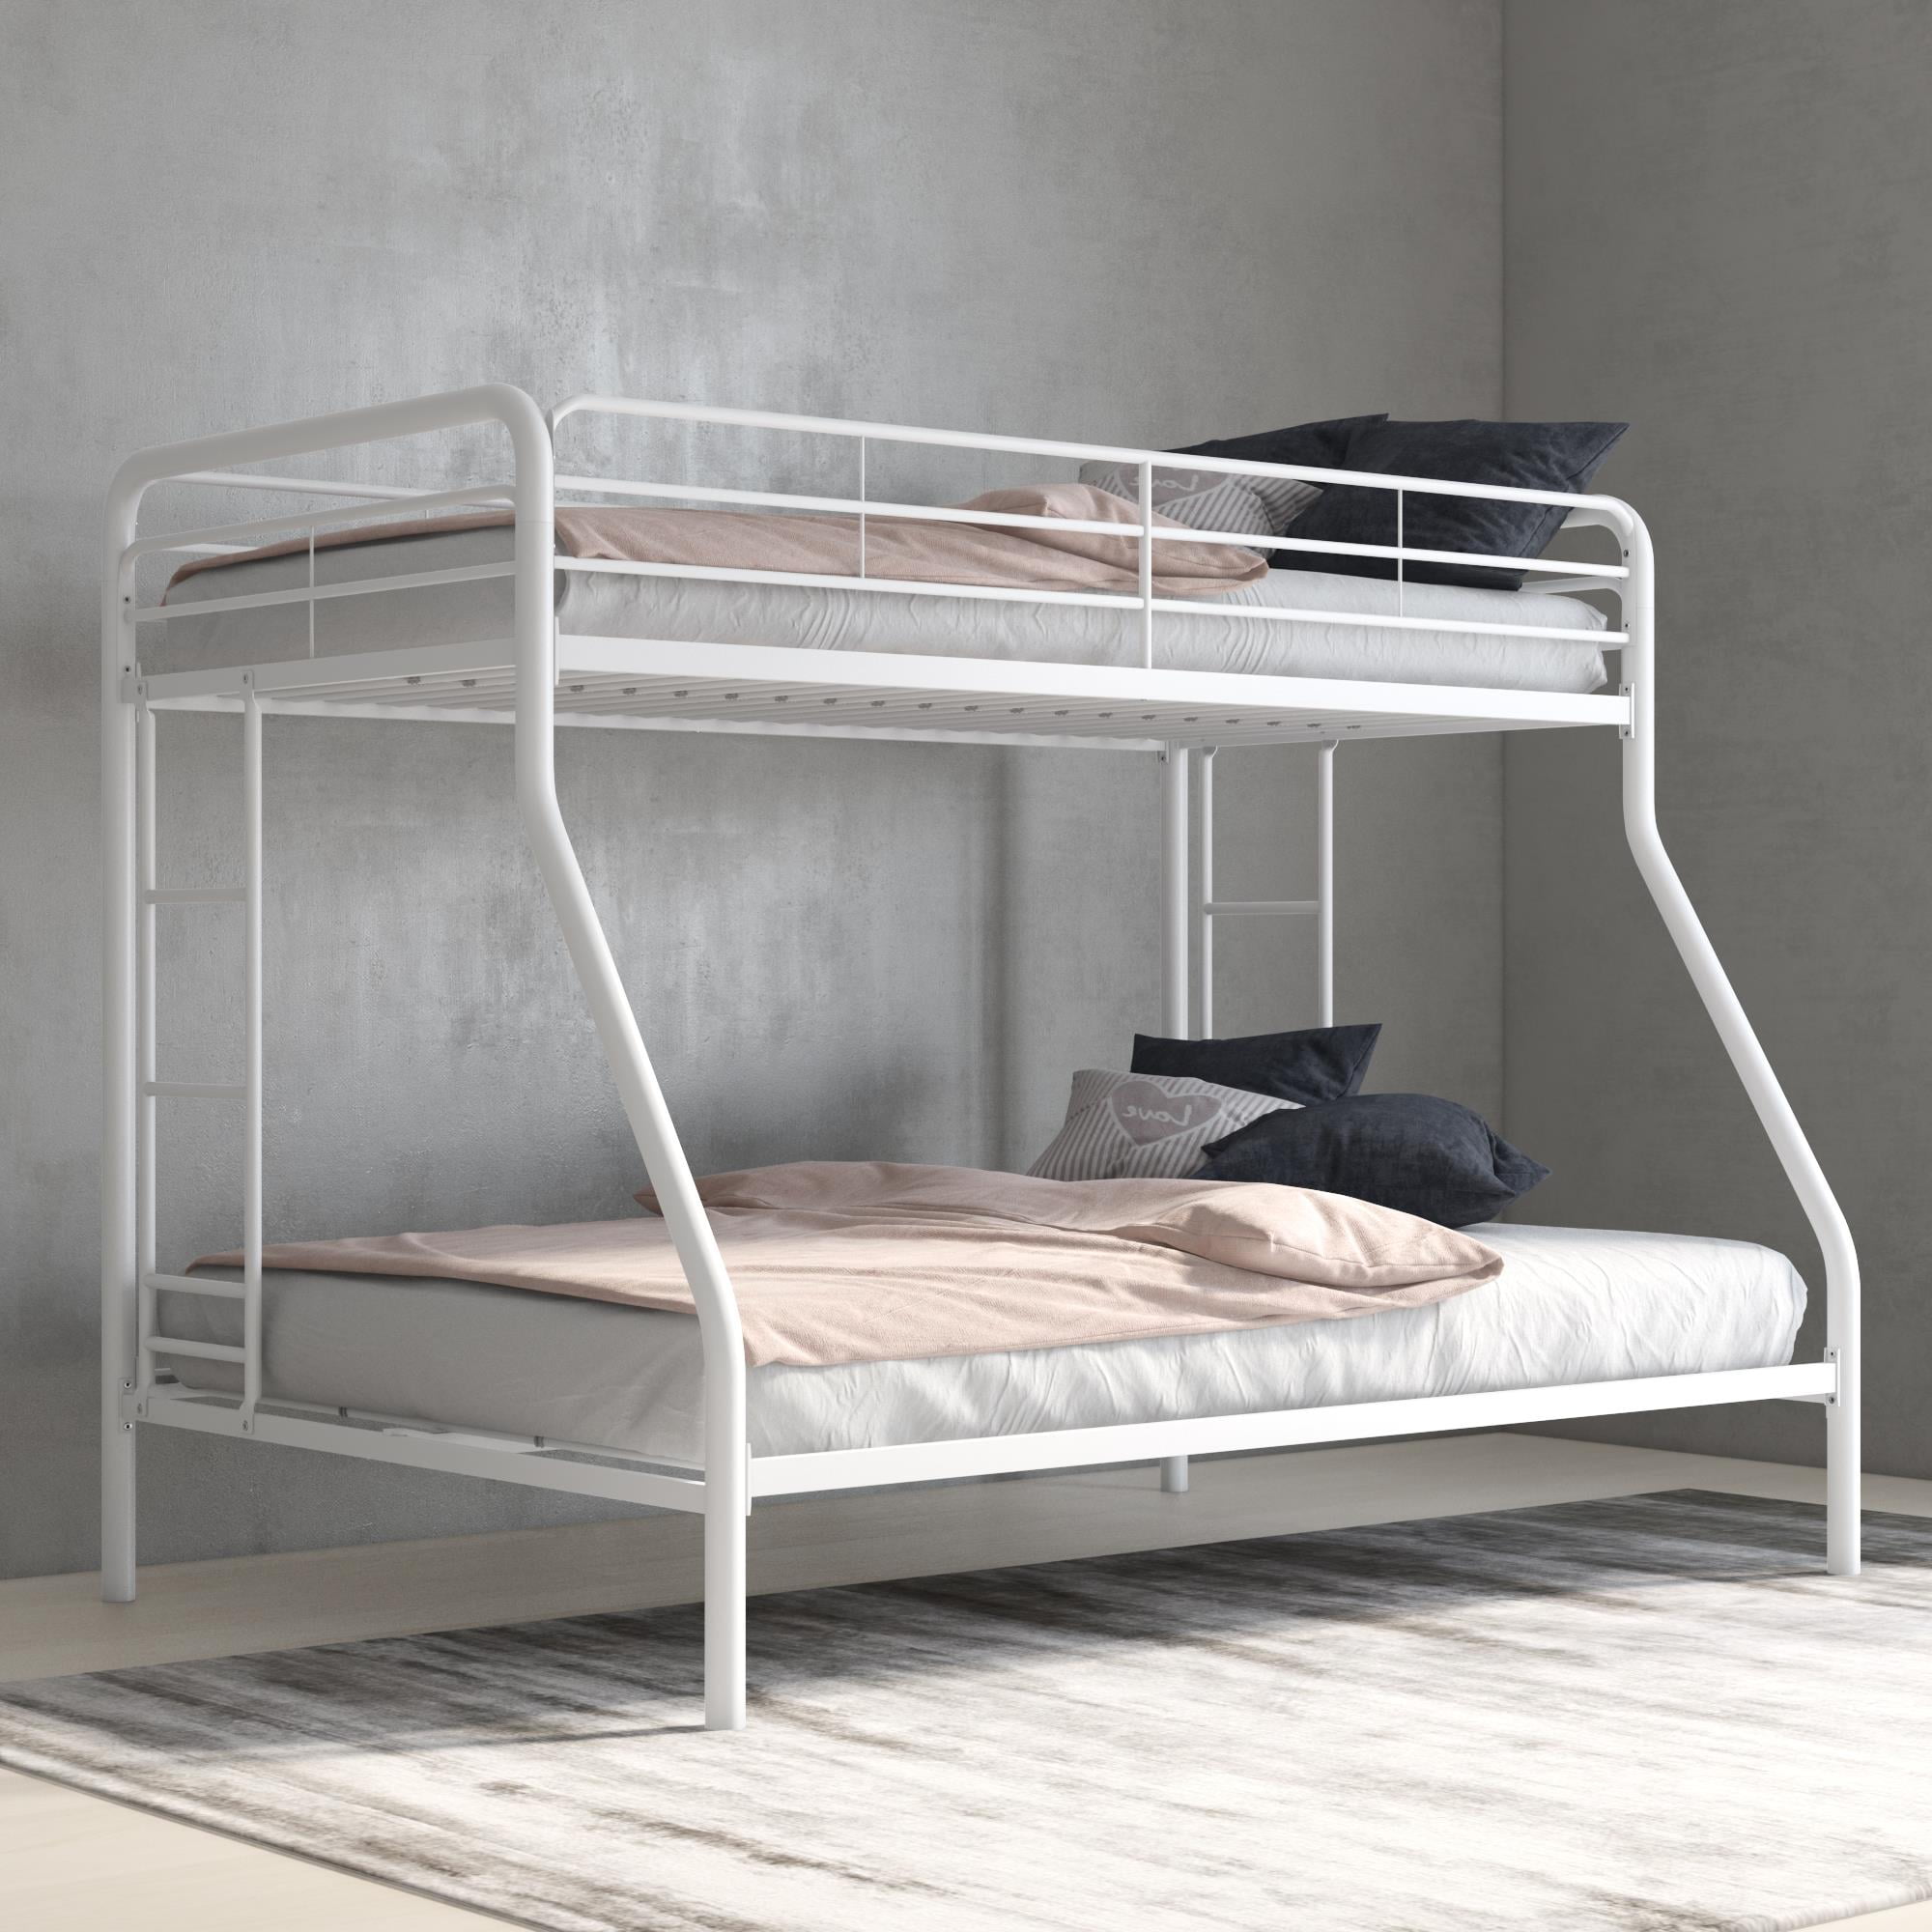 Twin Over Full Bunk Bed Free, Dorel Twin Over Full Bunk Bed